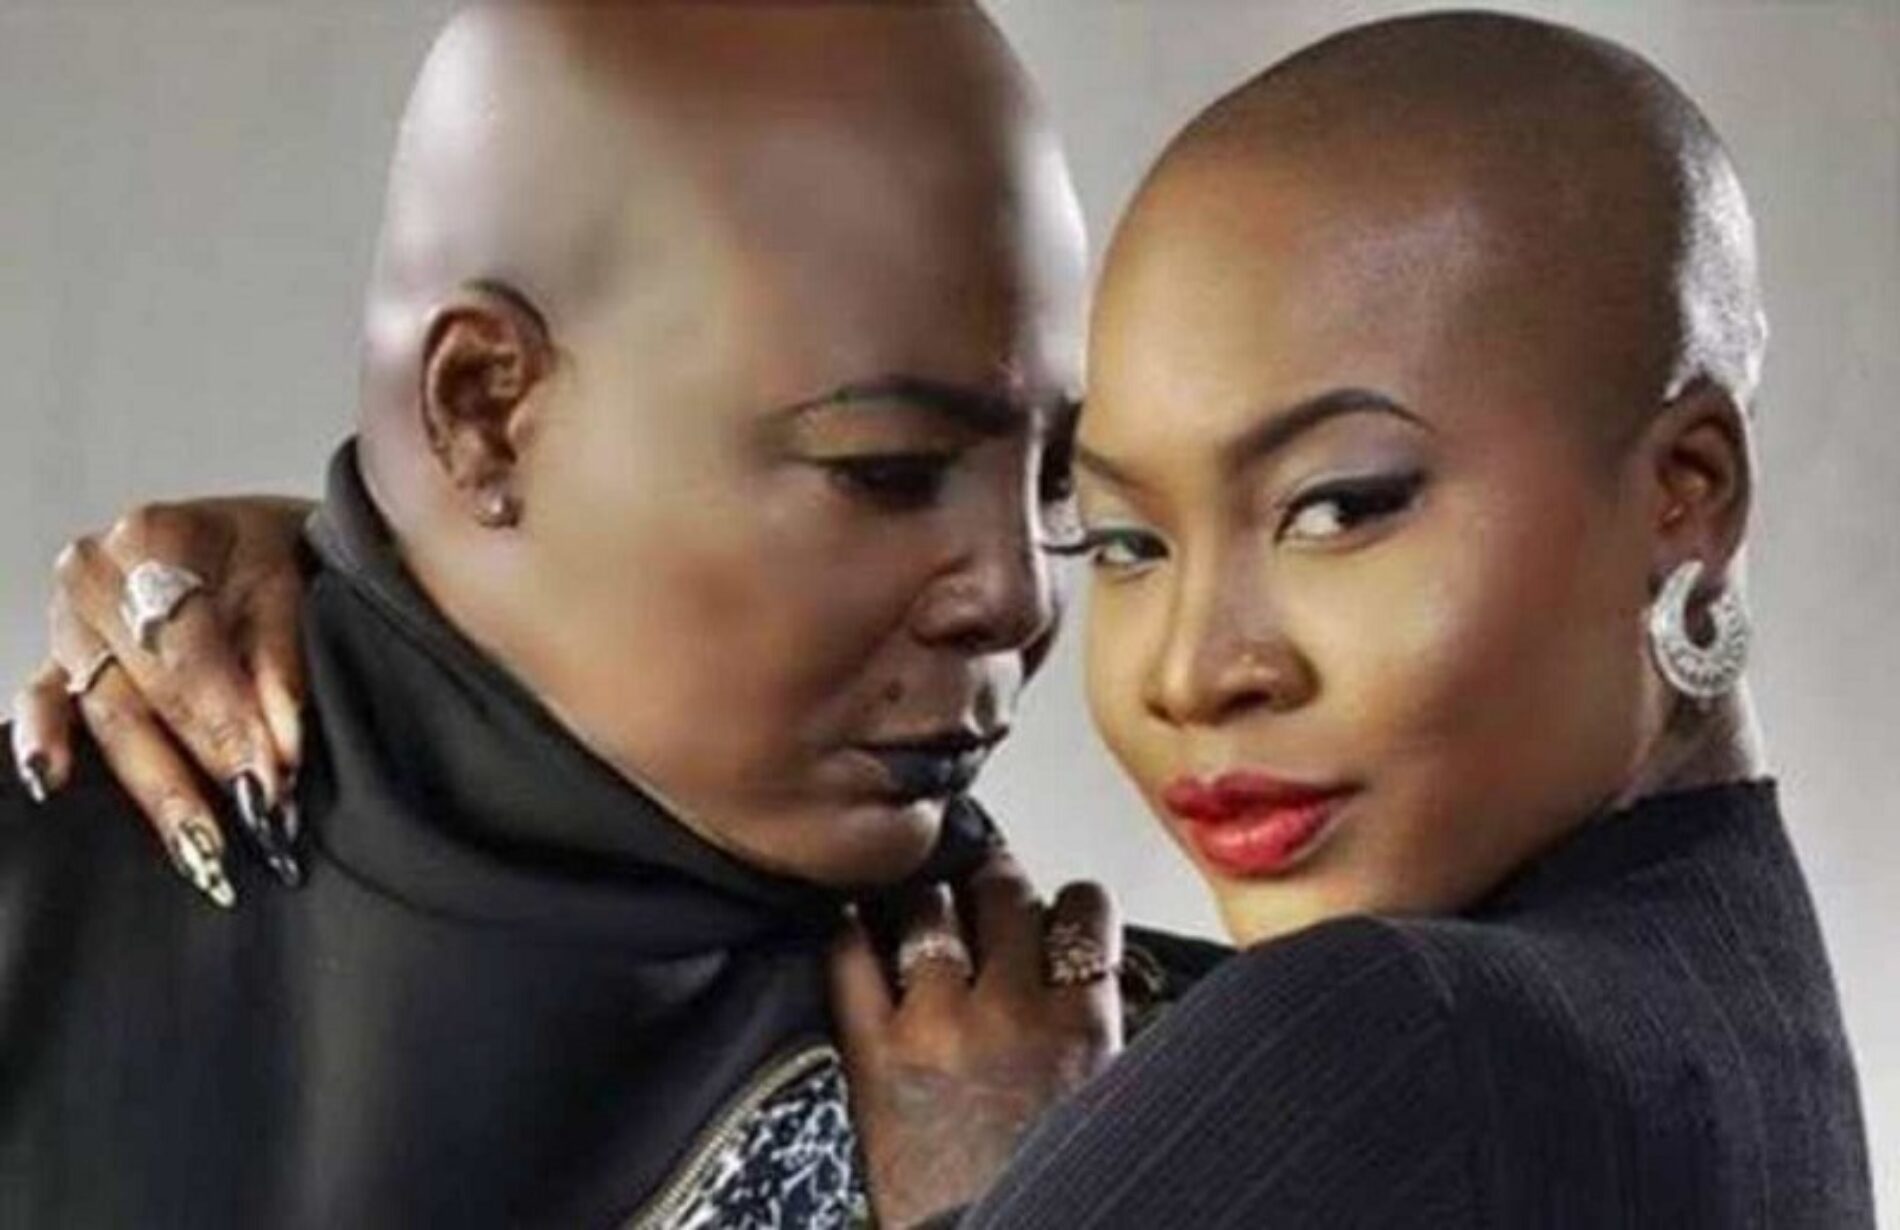 Charly Boy’s Apology To His Daughter, Dewy: More Gaslighting Or Genuine Repentance?